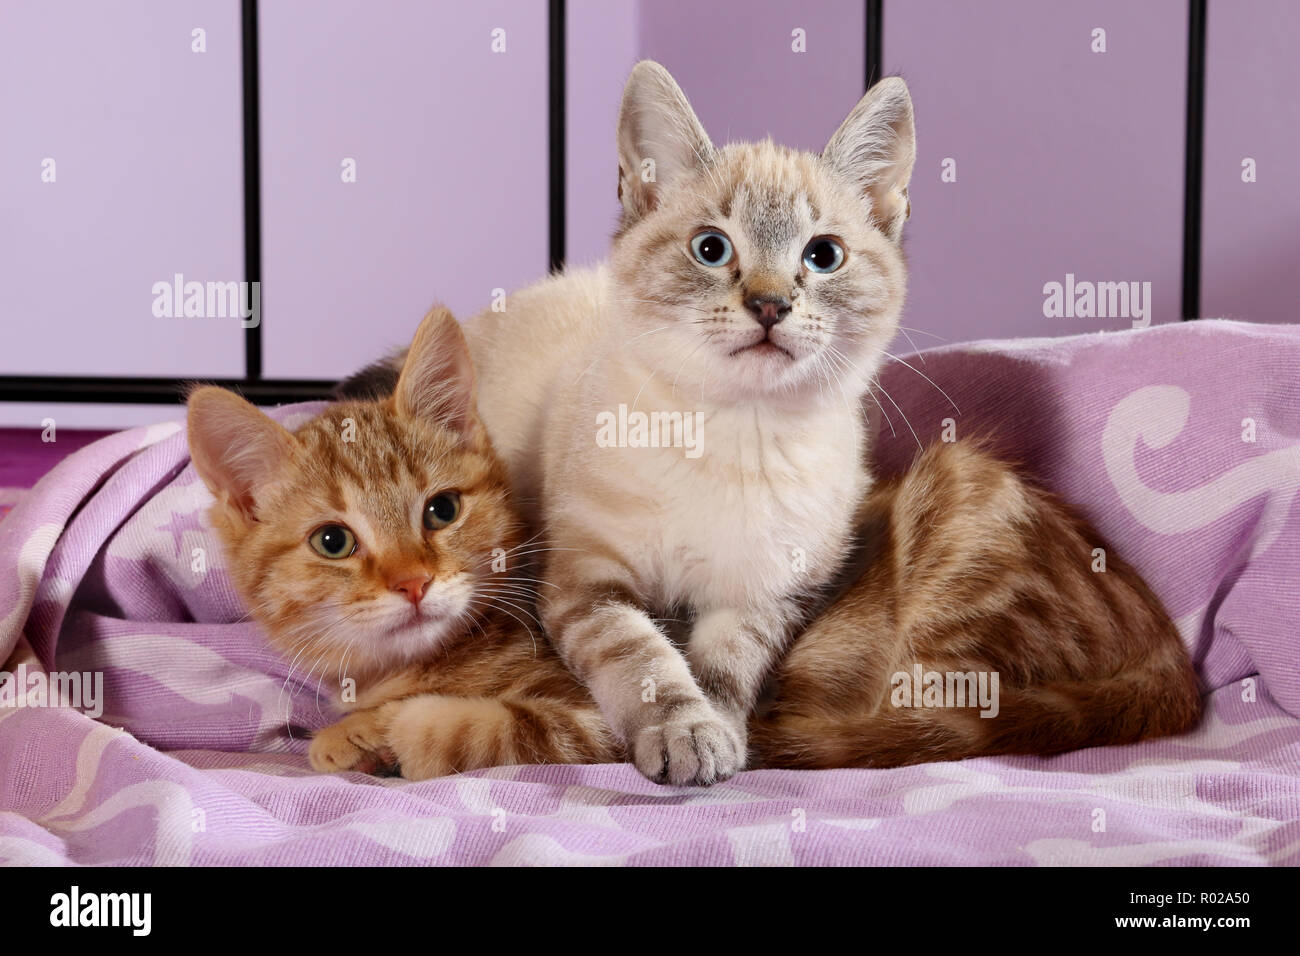 Deux chatons, 10 semaines, red tabby et seal tabby point, câlins Banque D'Images